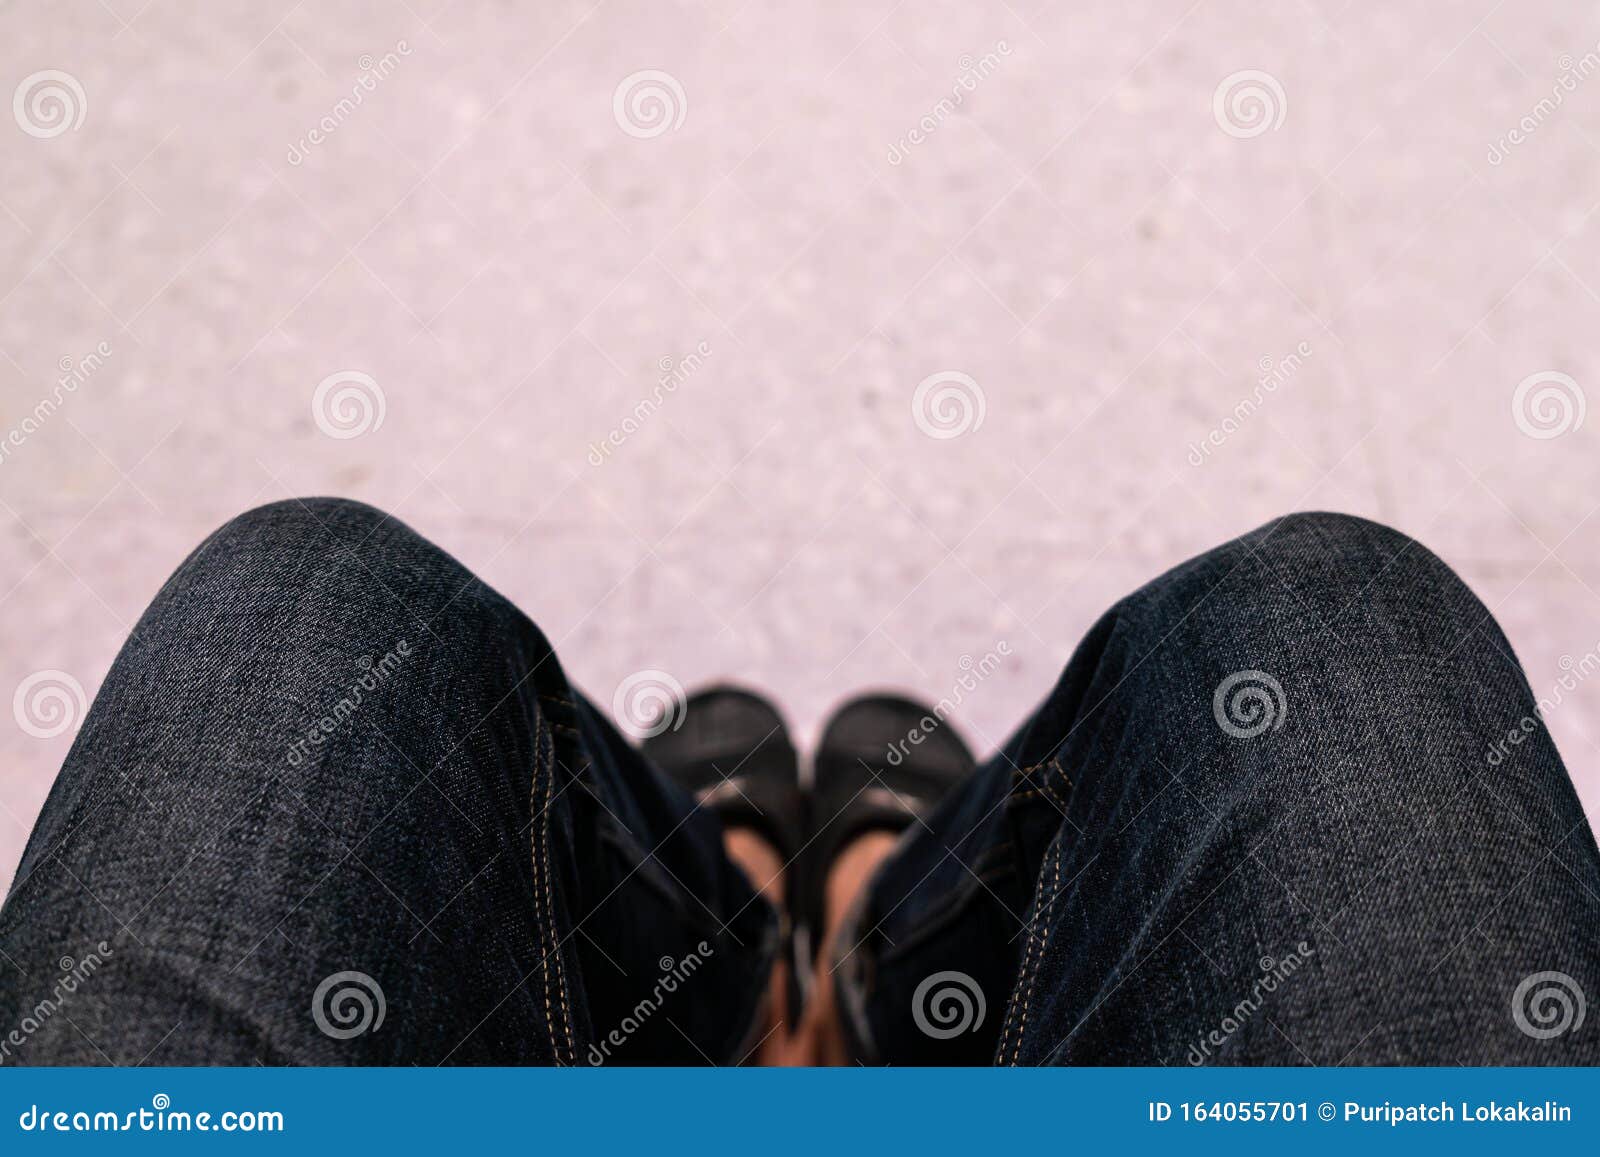 Sit With Your Knees Apart Stock Image Image Of Seat 164055701